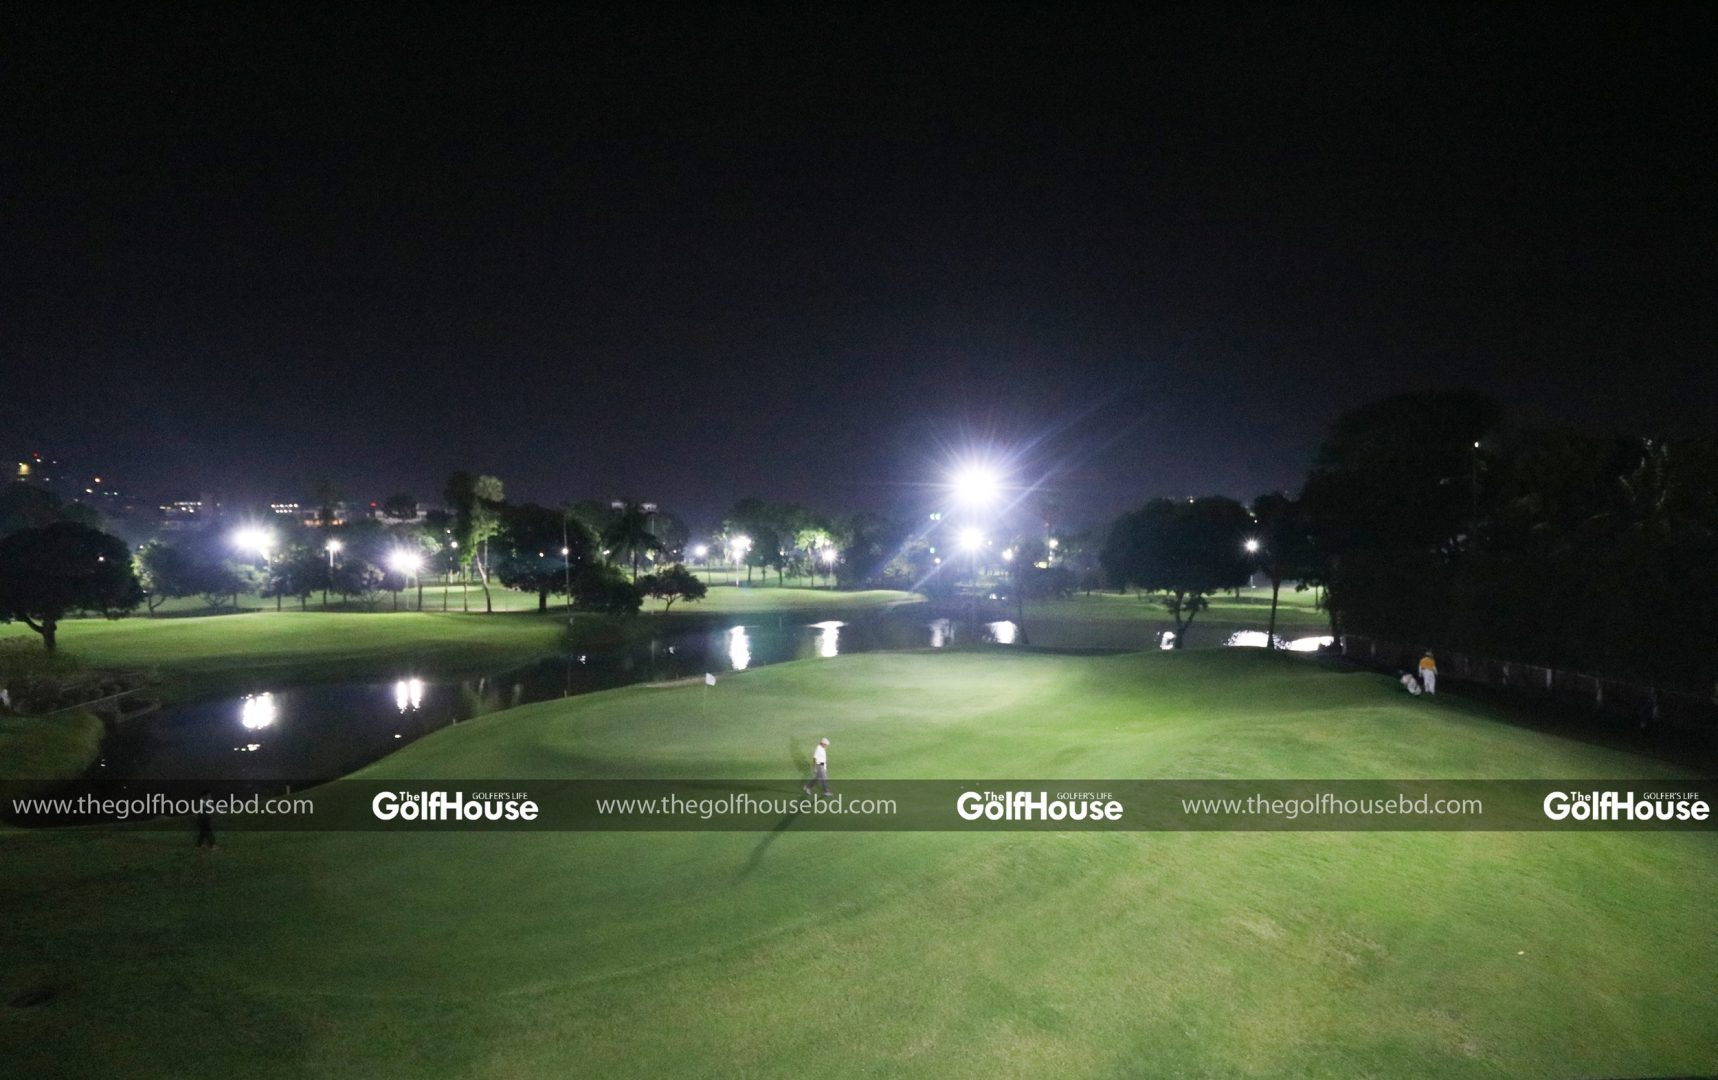 Tele_Tell_Orion_Trial_Night_Golf_Tournament_2018_was_held_at_KGC,_Dhaka_on_April_17_ 2018_A_total_49_golfers_played_the_trial_night_golf_tournament.